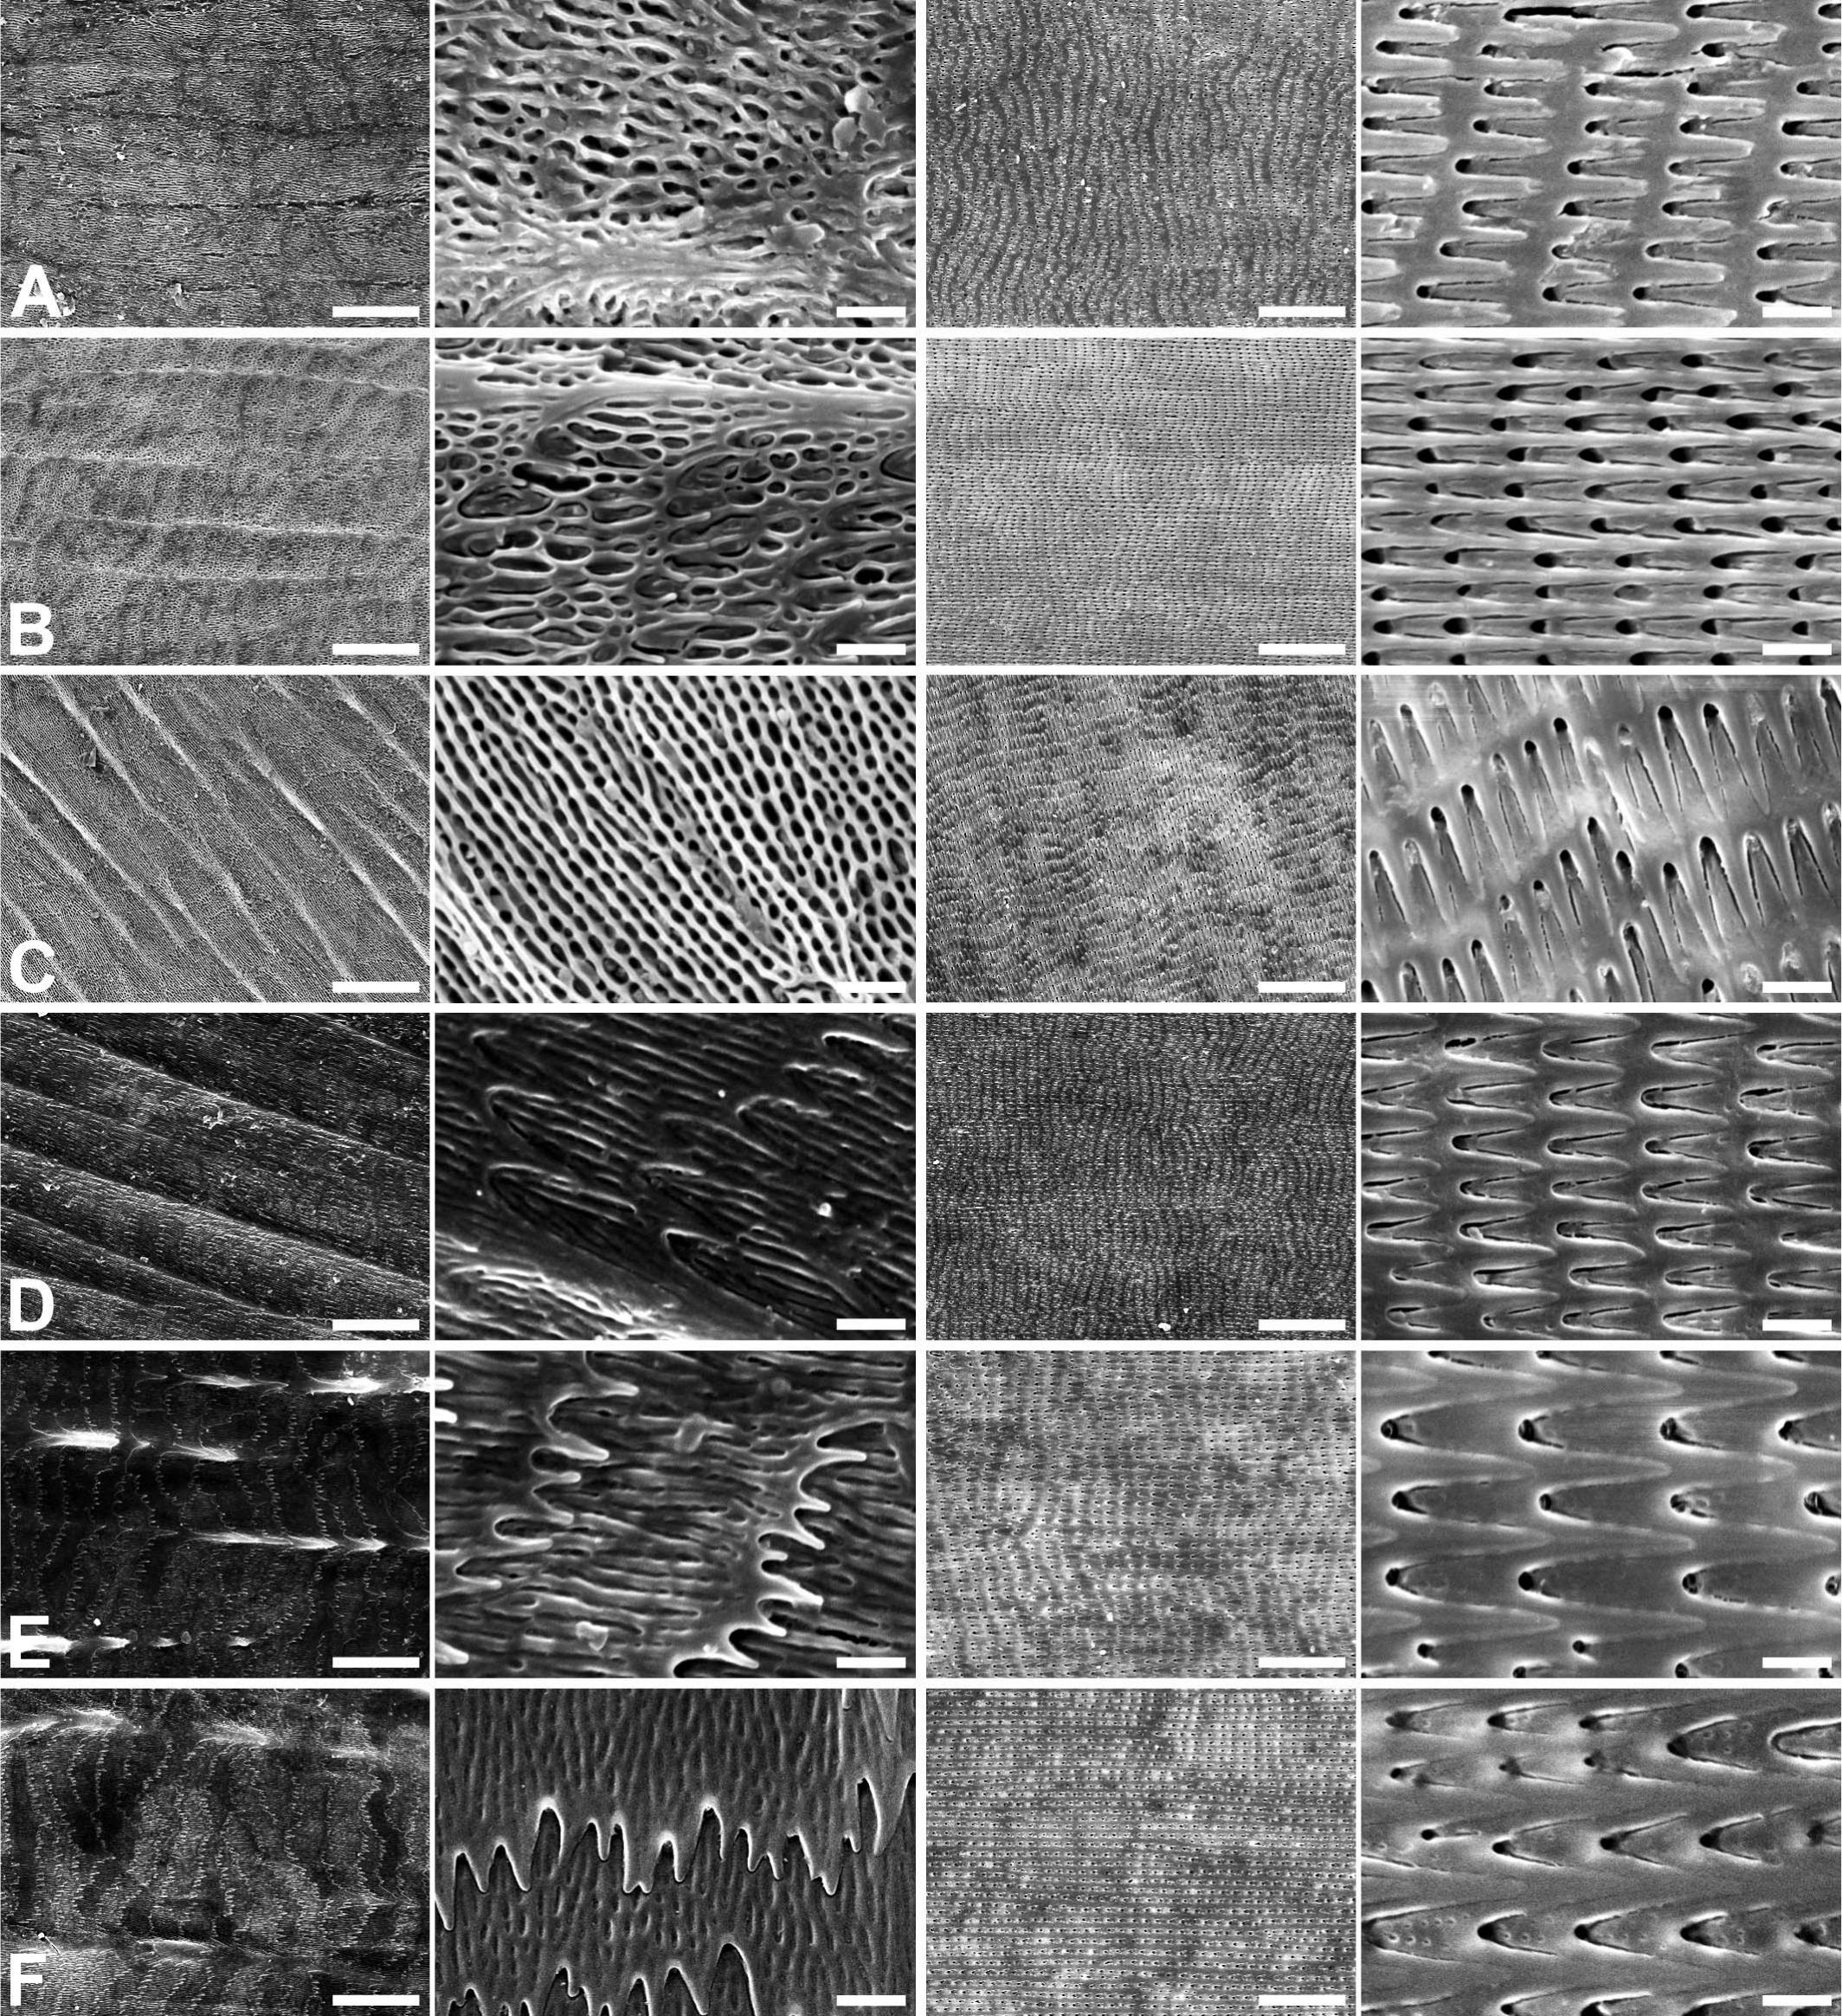 Species Identification Of Shed Snake Skins By Scanning Electron Microscopy With Verification Of Intraspecific Variations And Phylogenetic Comparative Analyses Of Microdermatoglyphics